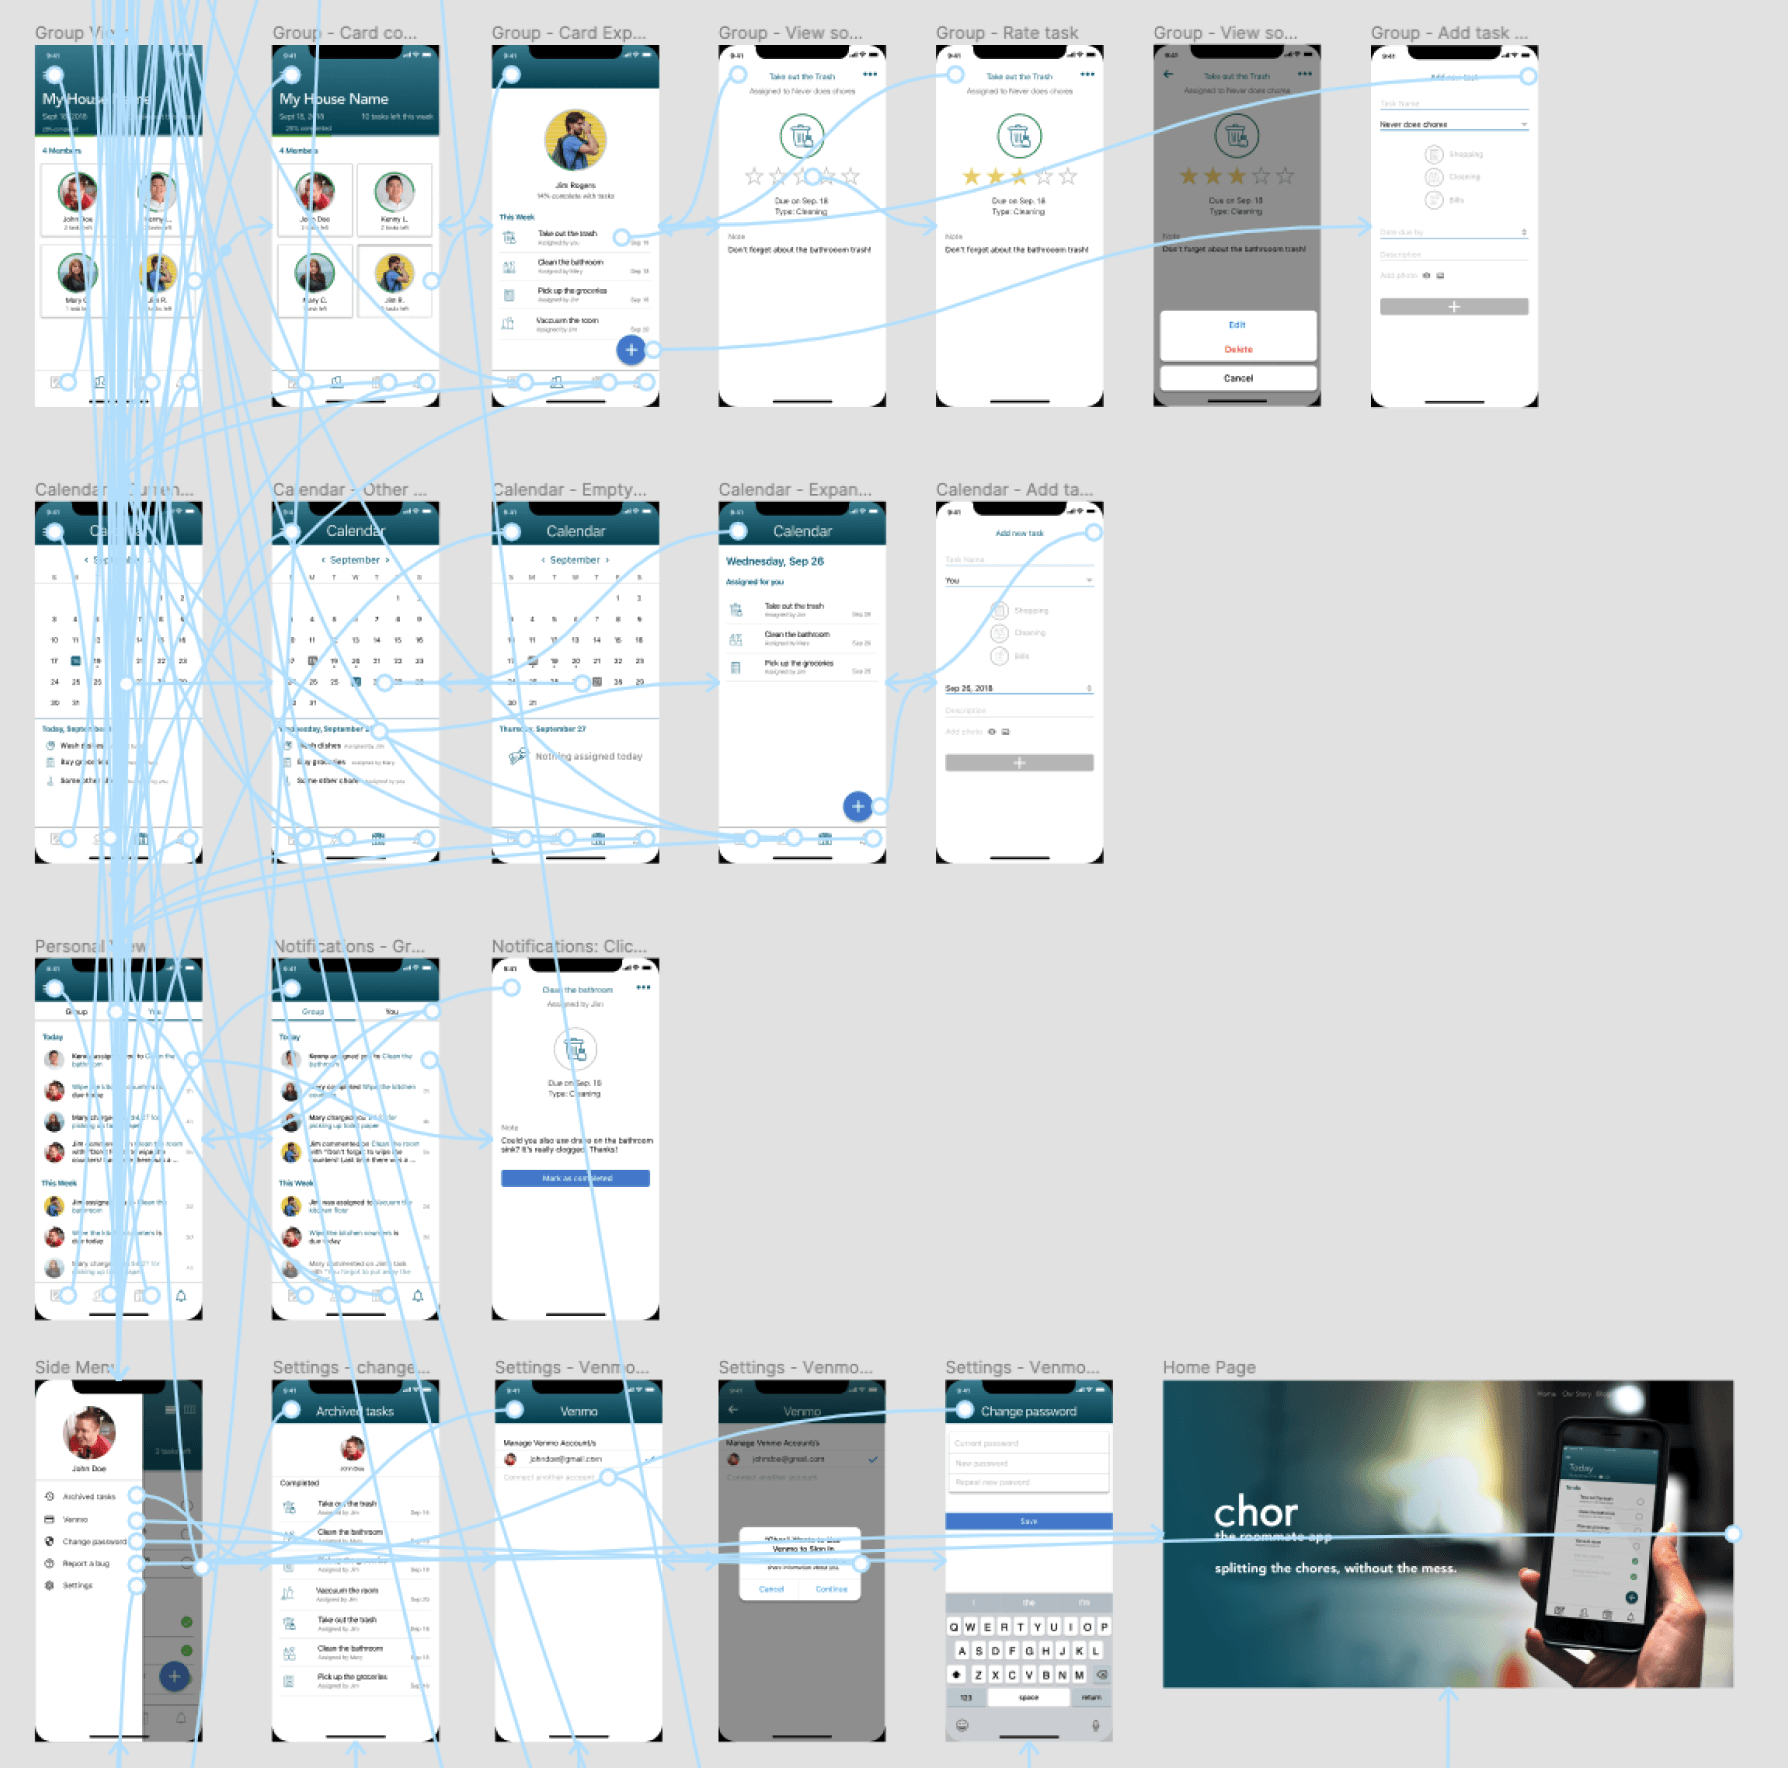 Overview of Figma screens in the final prototype.